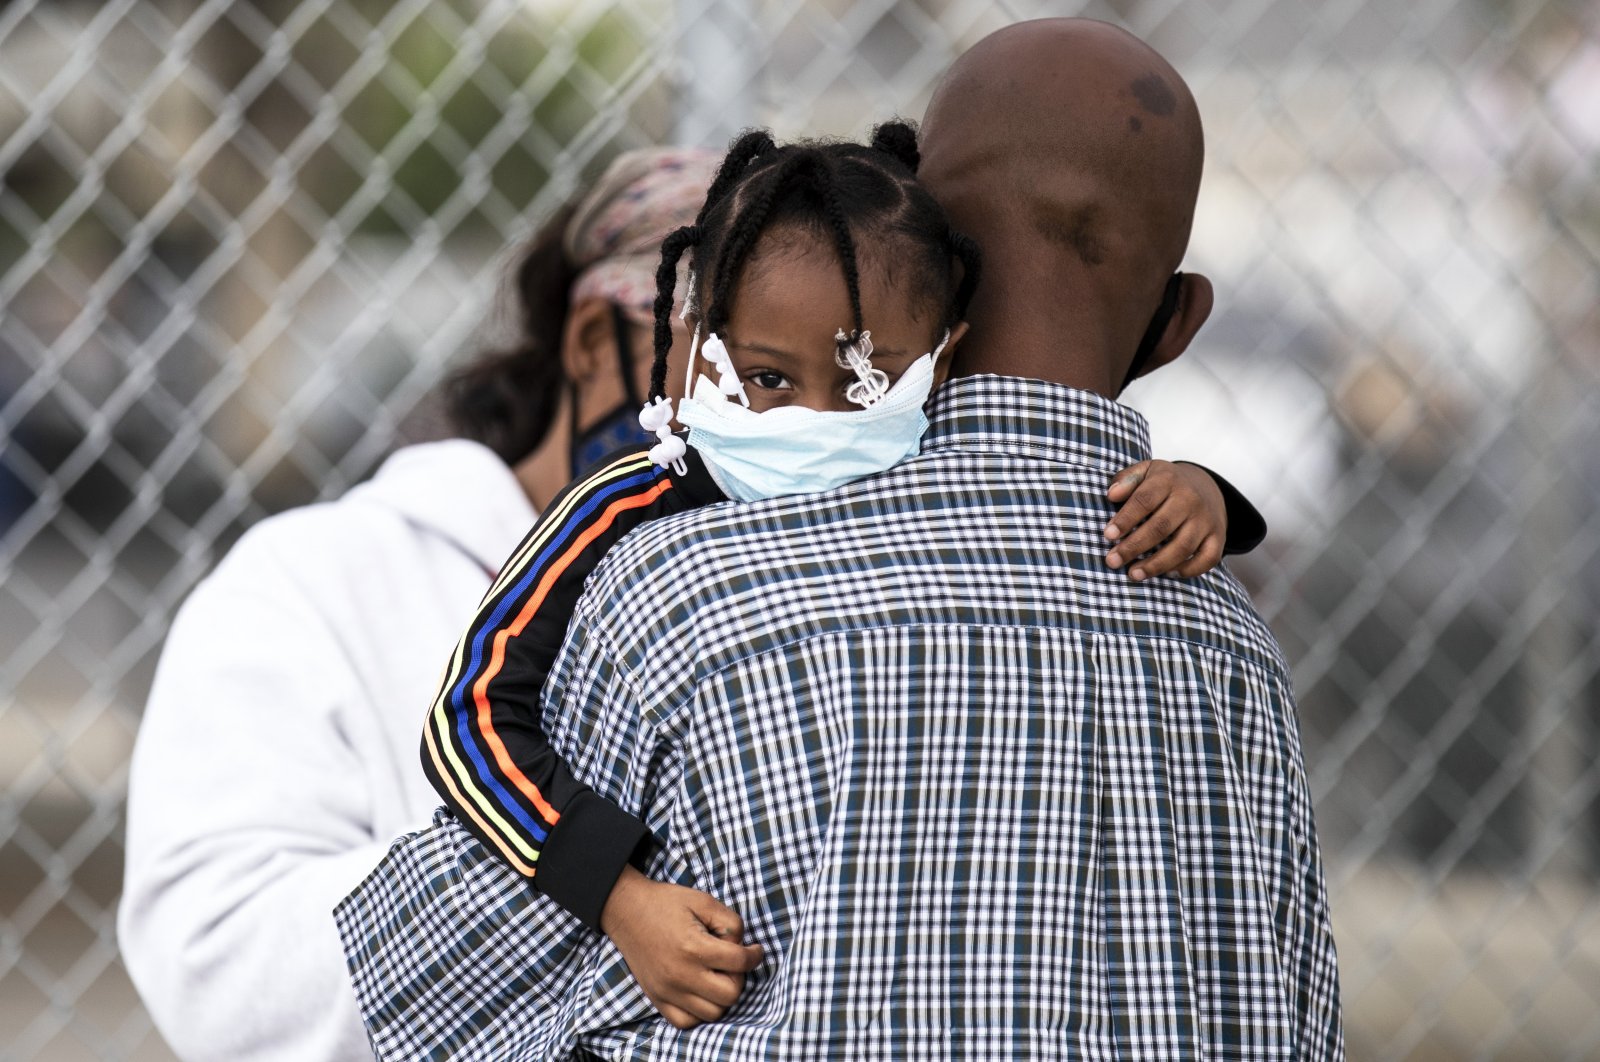 Father and daughter wearing face masks wait to get a COVID-19 test at a mobile COVID-19 clinic, Los Angeles, California, U.S., July 17, 2020. (EPA Photo)